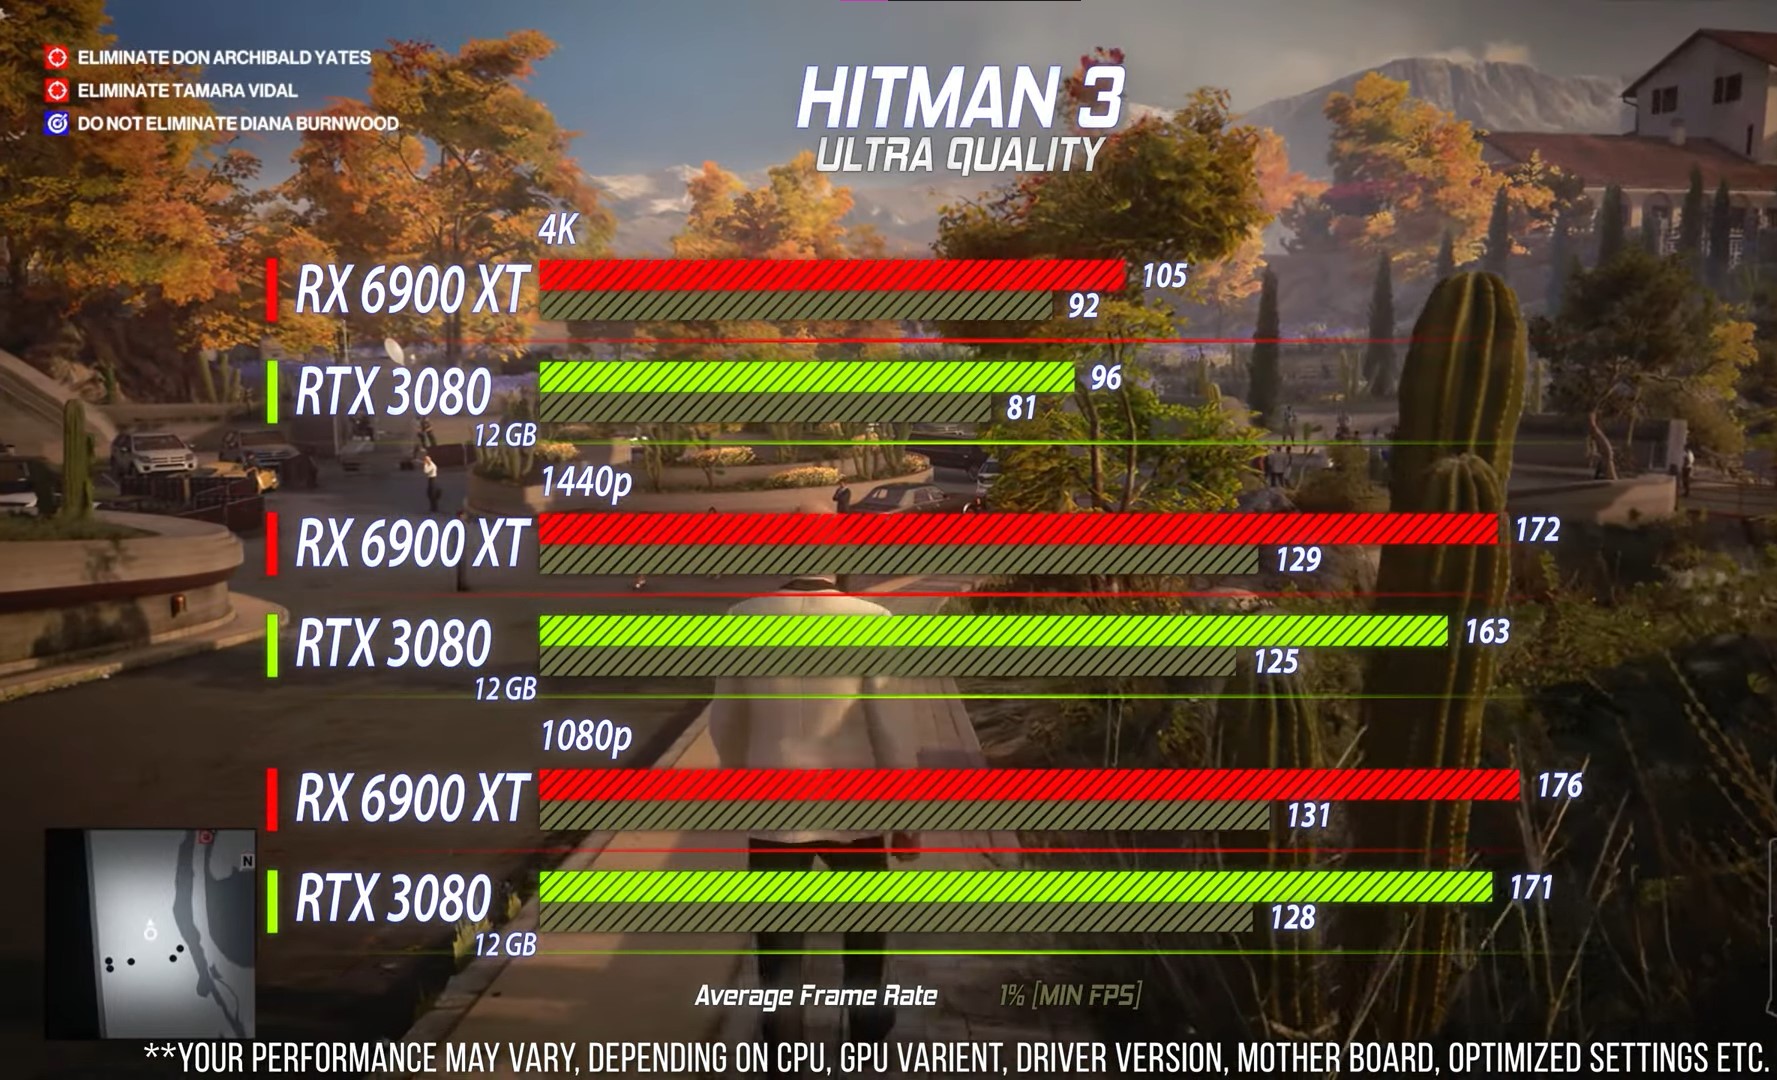 Hitman 3 Benchmarks on 1080p, 1440p, and 4K